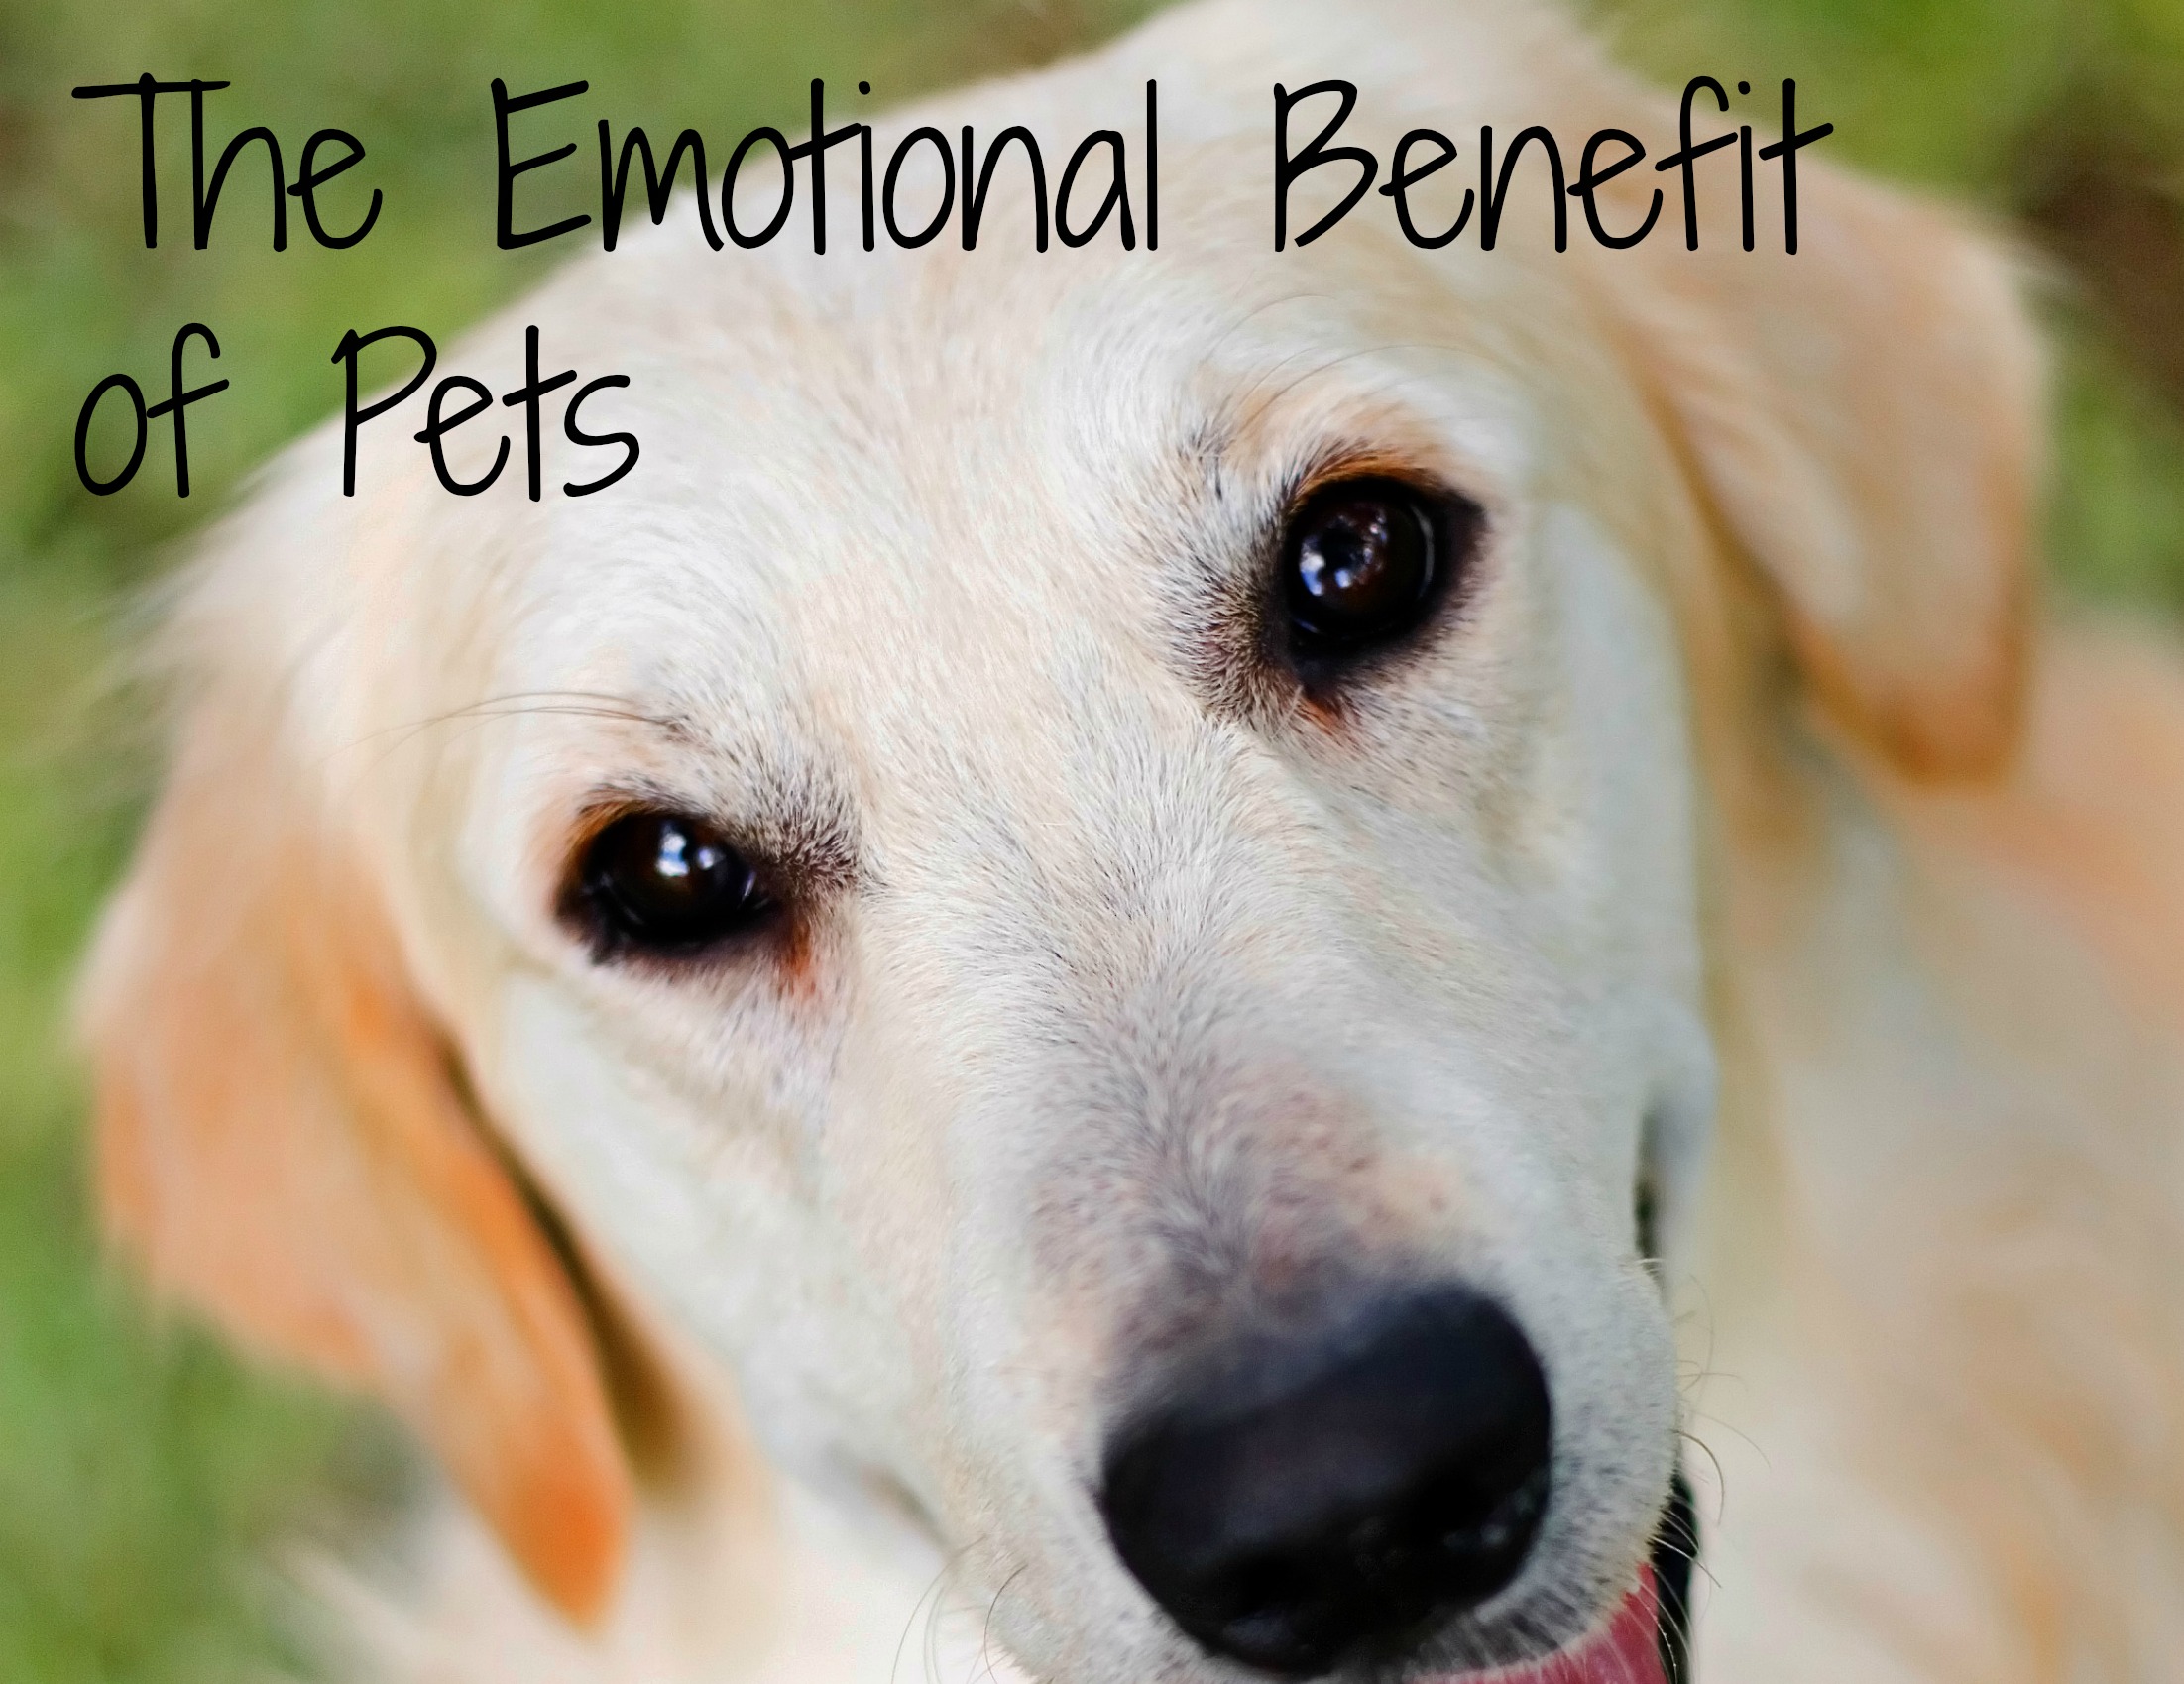 Therapy with Pets - The Emotional Benefits of Pets - An image of a dog